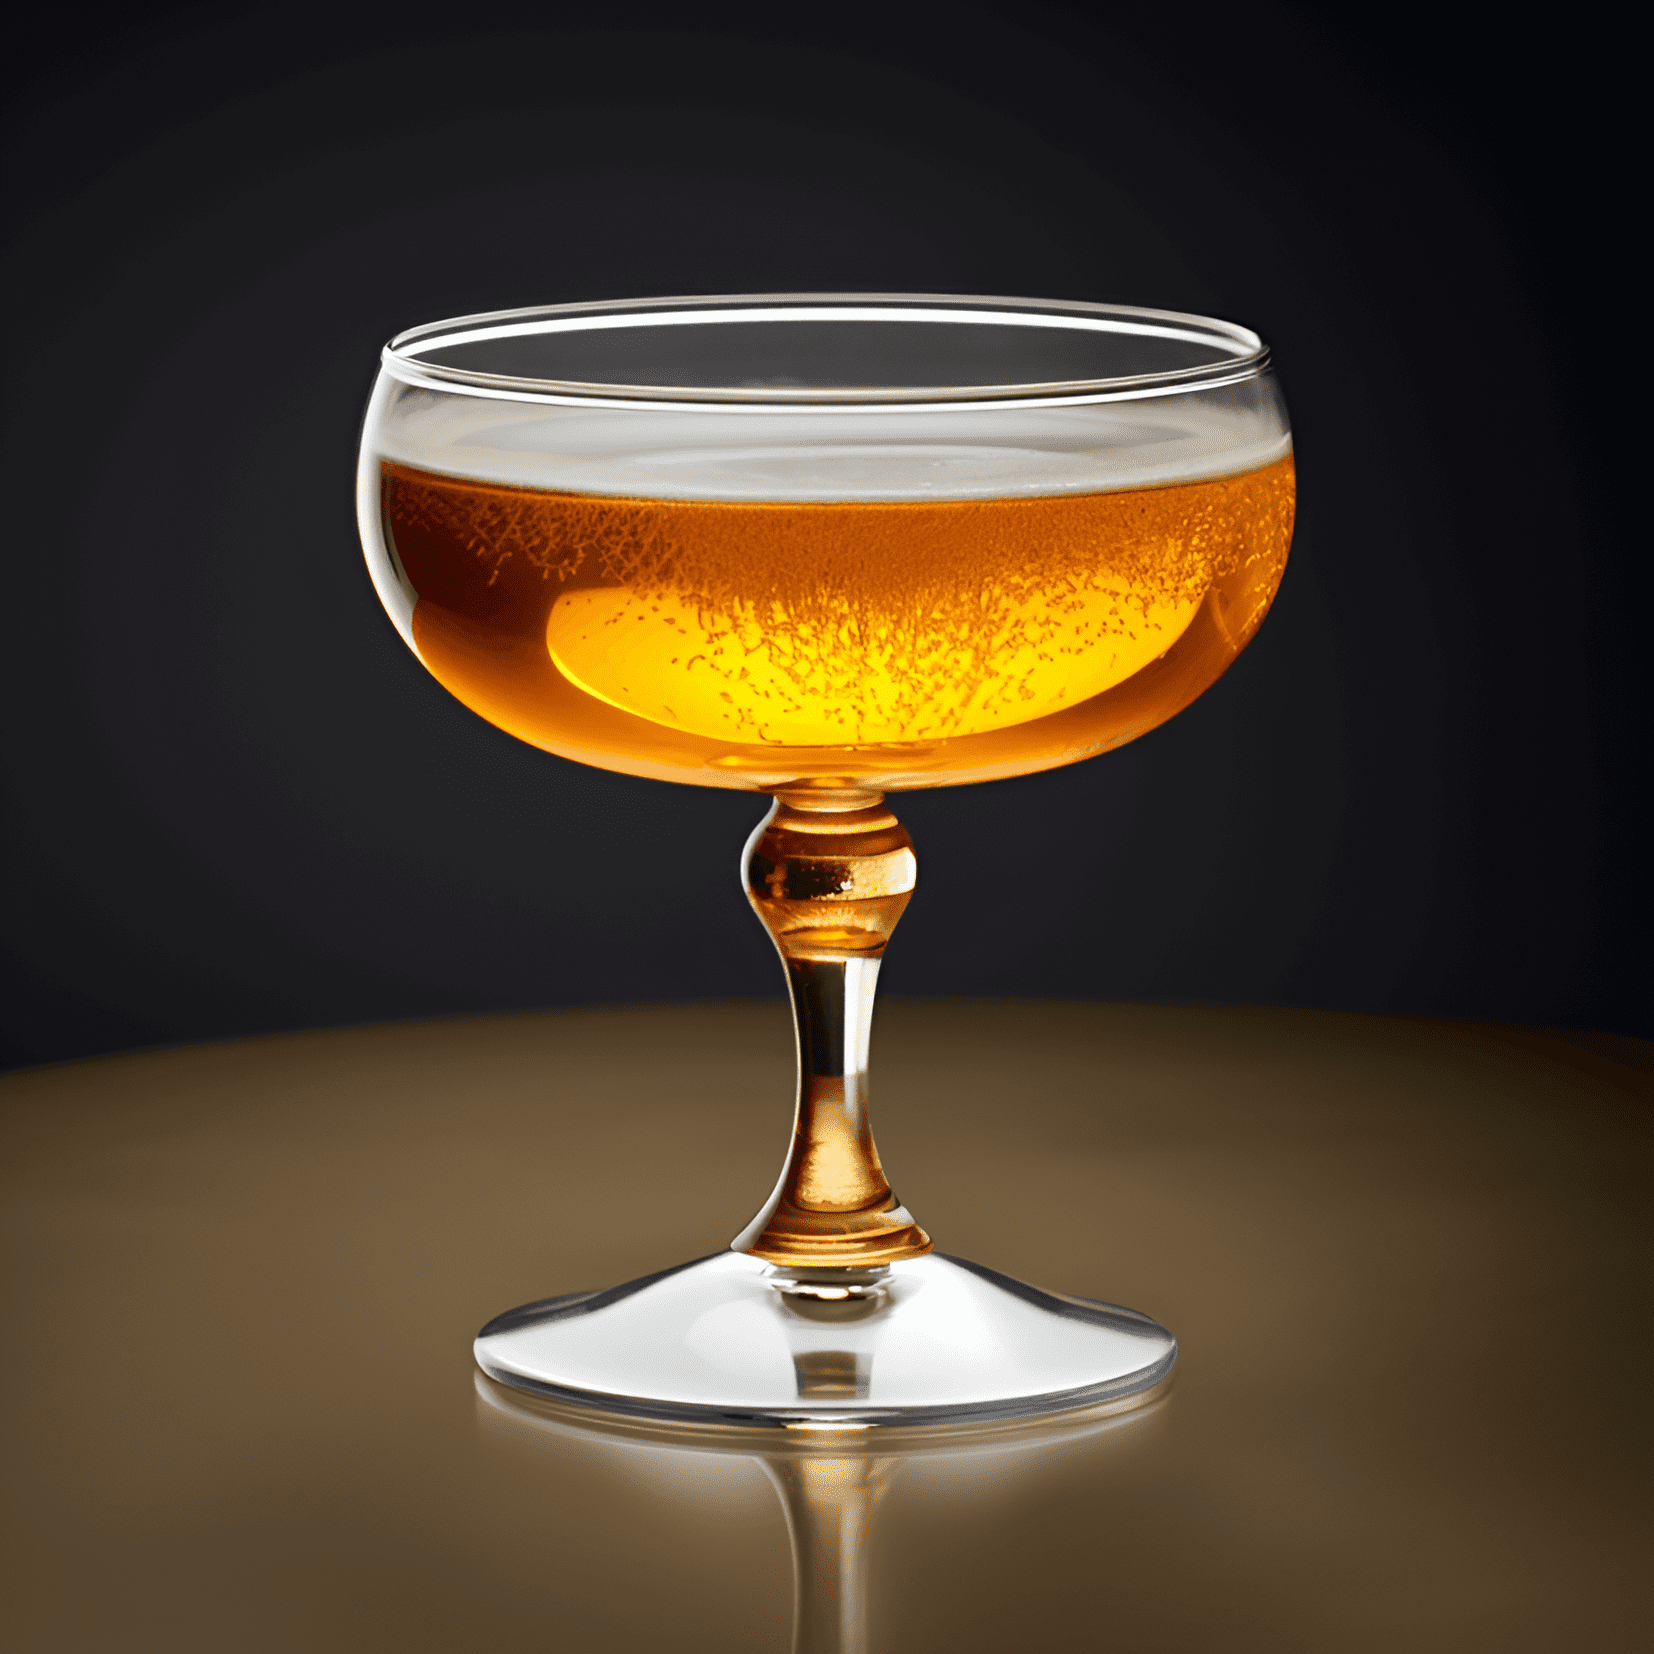 Prince of Wales Cocktail Recipe - The Prince of Wales cocktail is a well-balanced, complex, and refreshing drink. It has a slightly sweet and fruity taste, with a hint of bitterness from the Angostura bitters. The champagne adds a touch of effervescence and lightness to the drink.